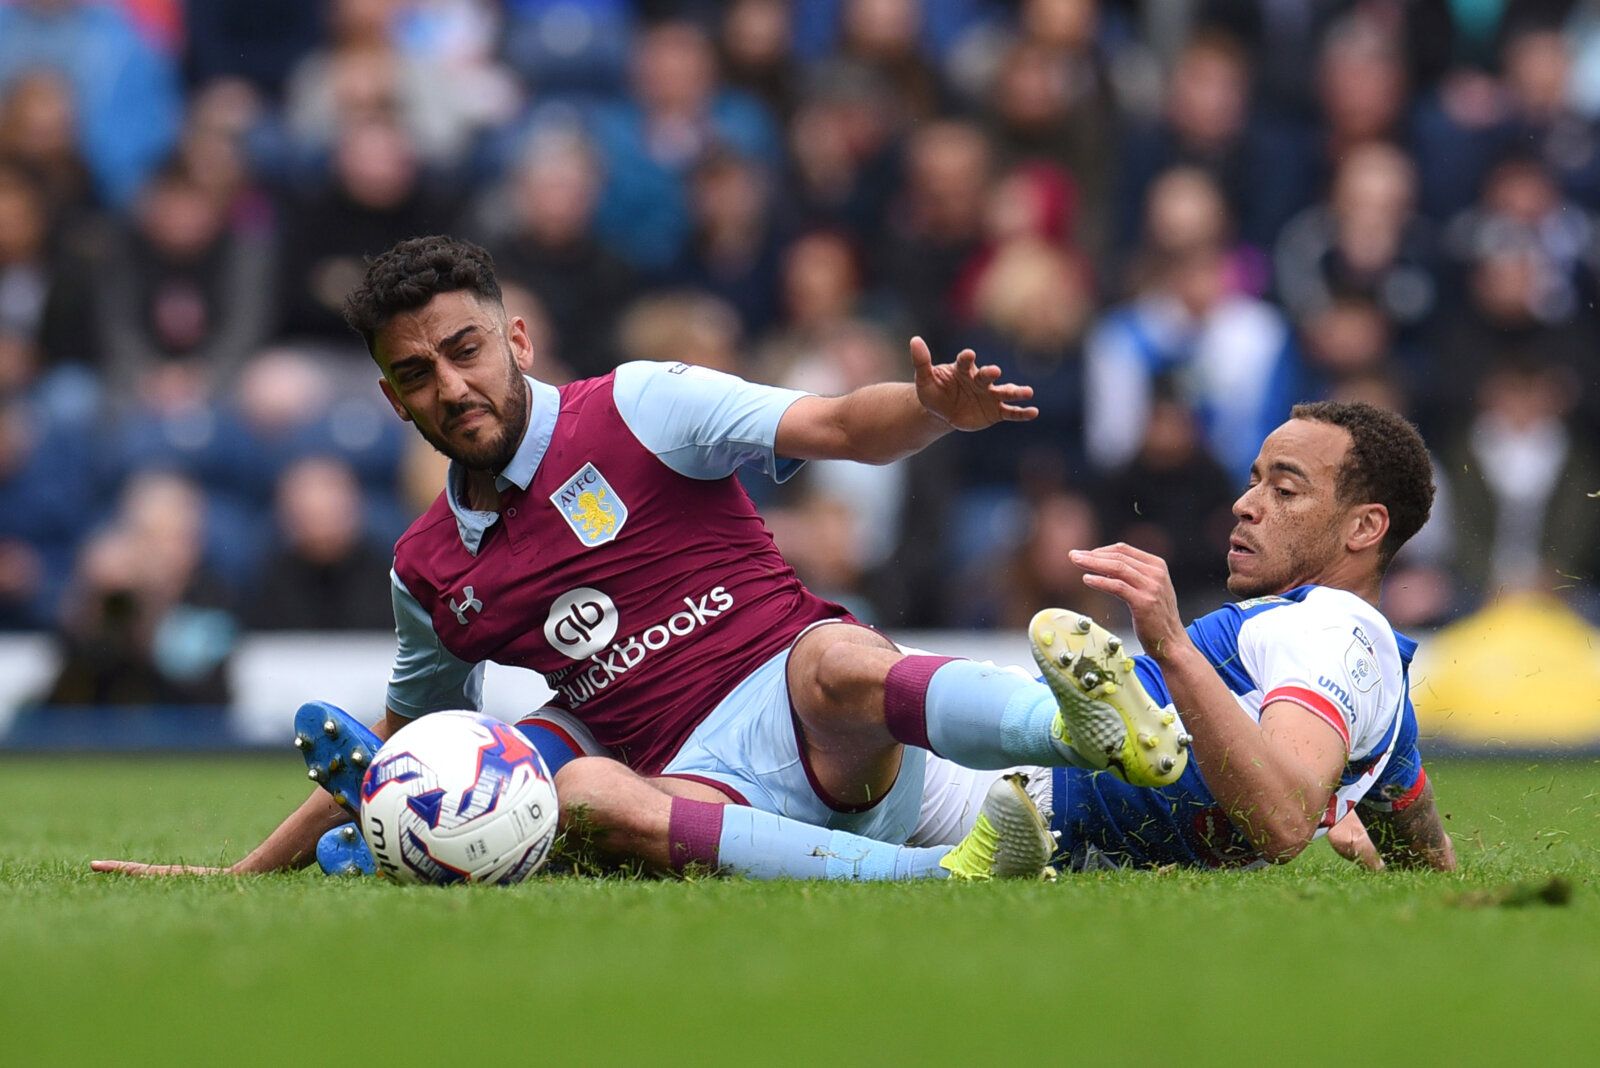 Britain Football Soccer - Blackburn Rovers v Aston Villa - Sky Bet Championship - Ewood Park - 29/4/17 Blackburn Rovers' Elliott Bennett in action with Aston Villa's Neil Taylor Mandatory Credit: Action Images / Paul Burrows Livepic EDITORIAL USE ONLY. No use with unauthorized audio, video, data, fixture lists, club/league logos or 